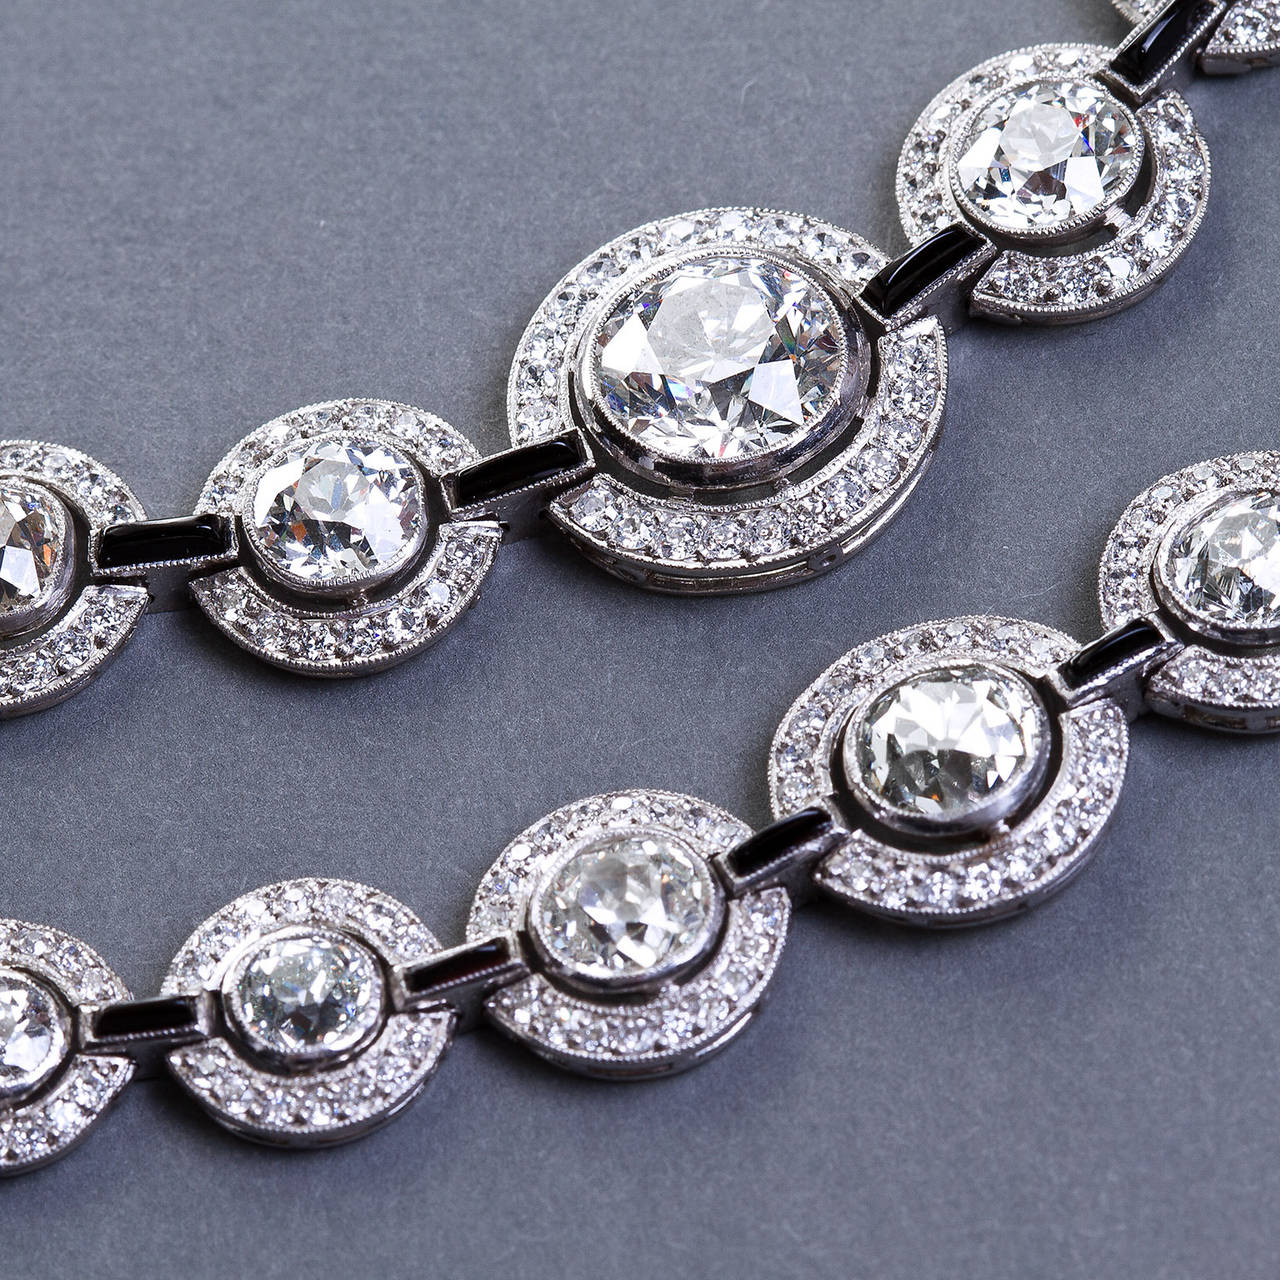 A very fine diamond and onyx link in platinum necklace and bracelet set from the Art Deco period. 
Approximately 30 carats of diamonds total. Necklace contains a center stone approx. 3.00 carats J (Near Colorless) color VS2-SI1 clarity with a